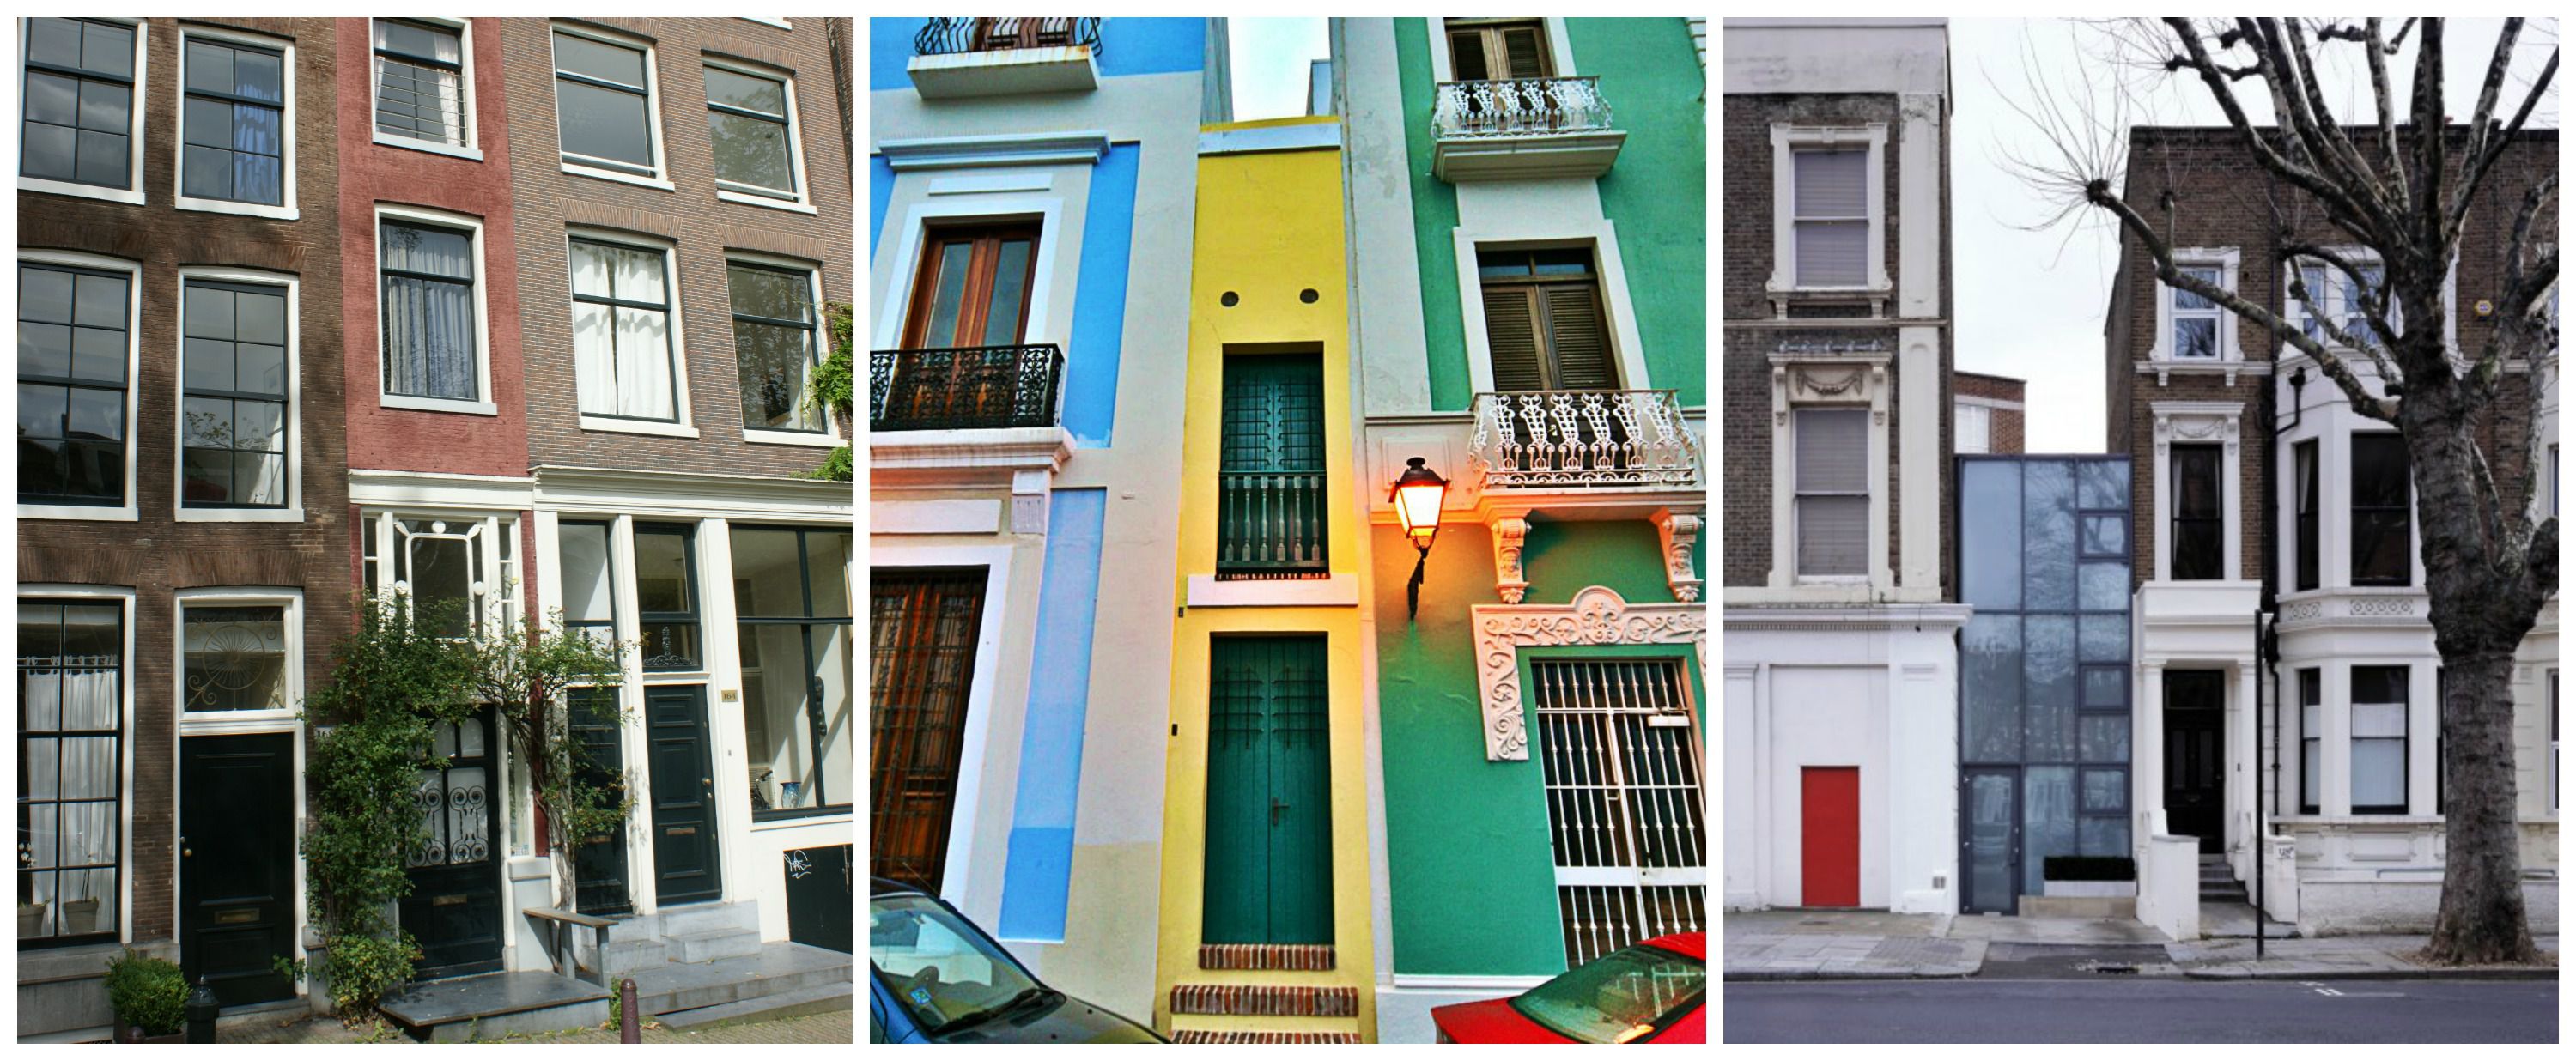 Skinny Houses Around the World - World's Narrowest Houses